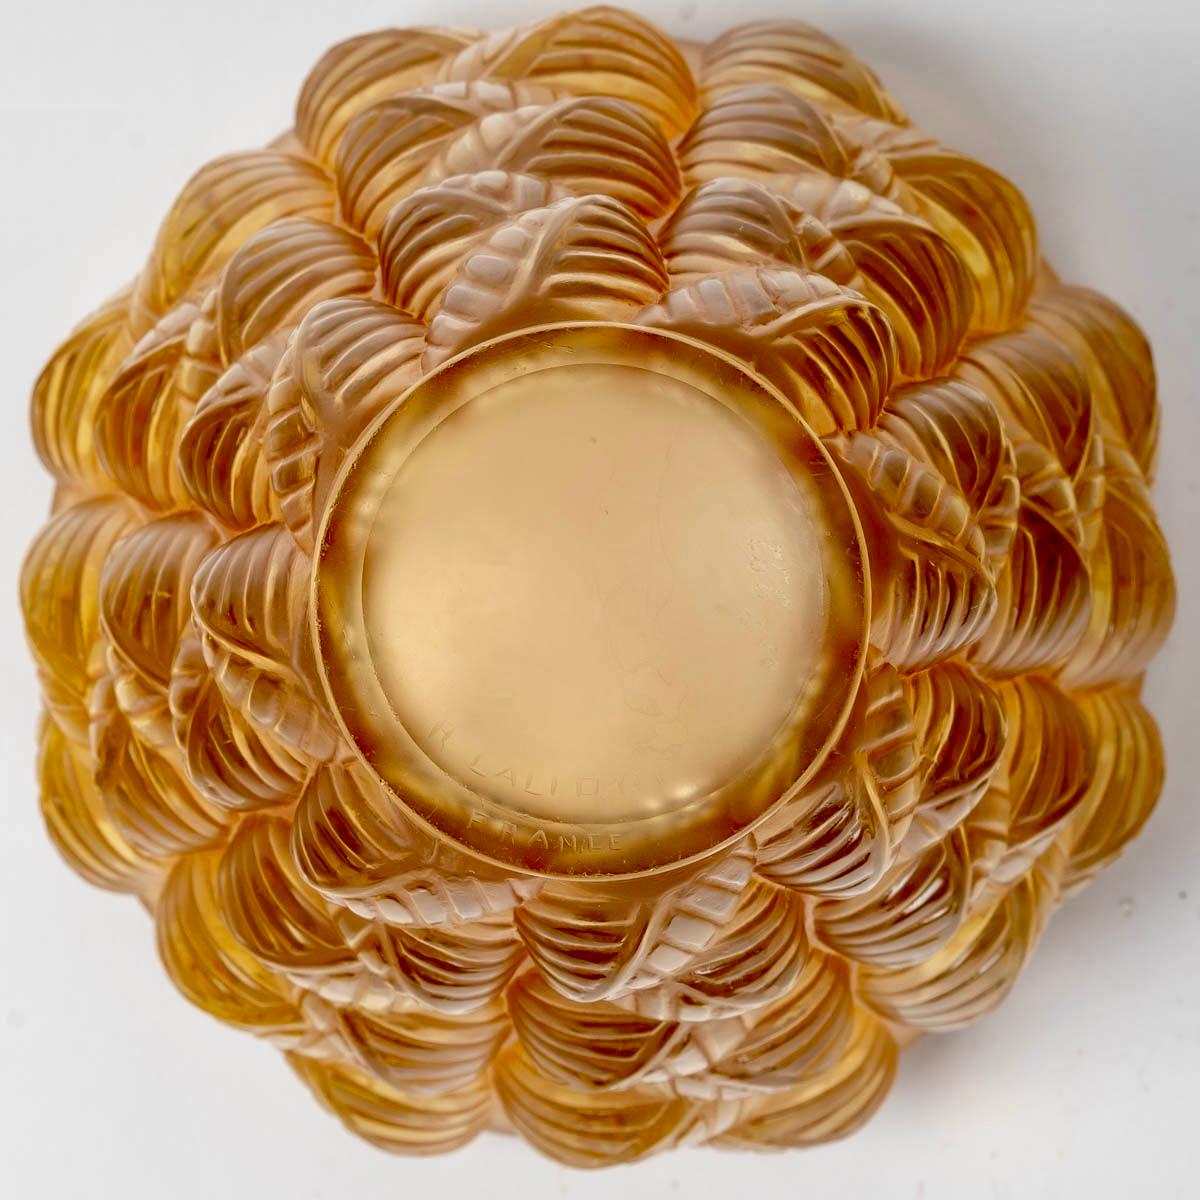 Molded 1927 René Lalique - Vase Moissac Yellow Amber Glass Sepia Patina For Sale